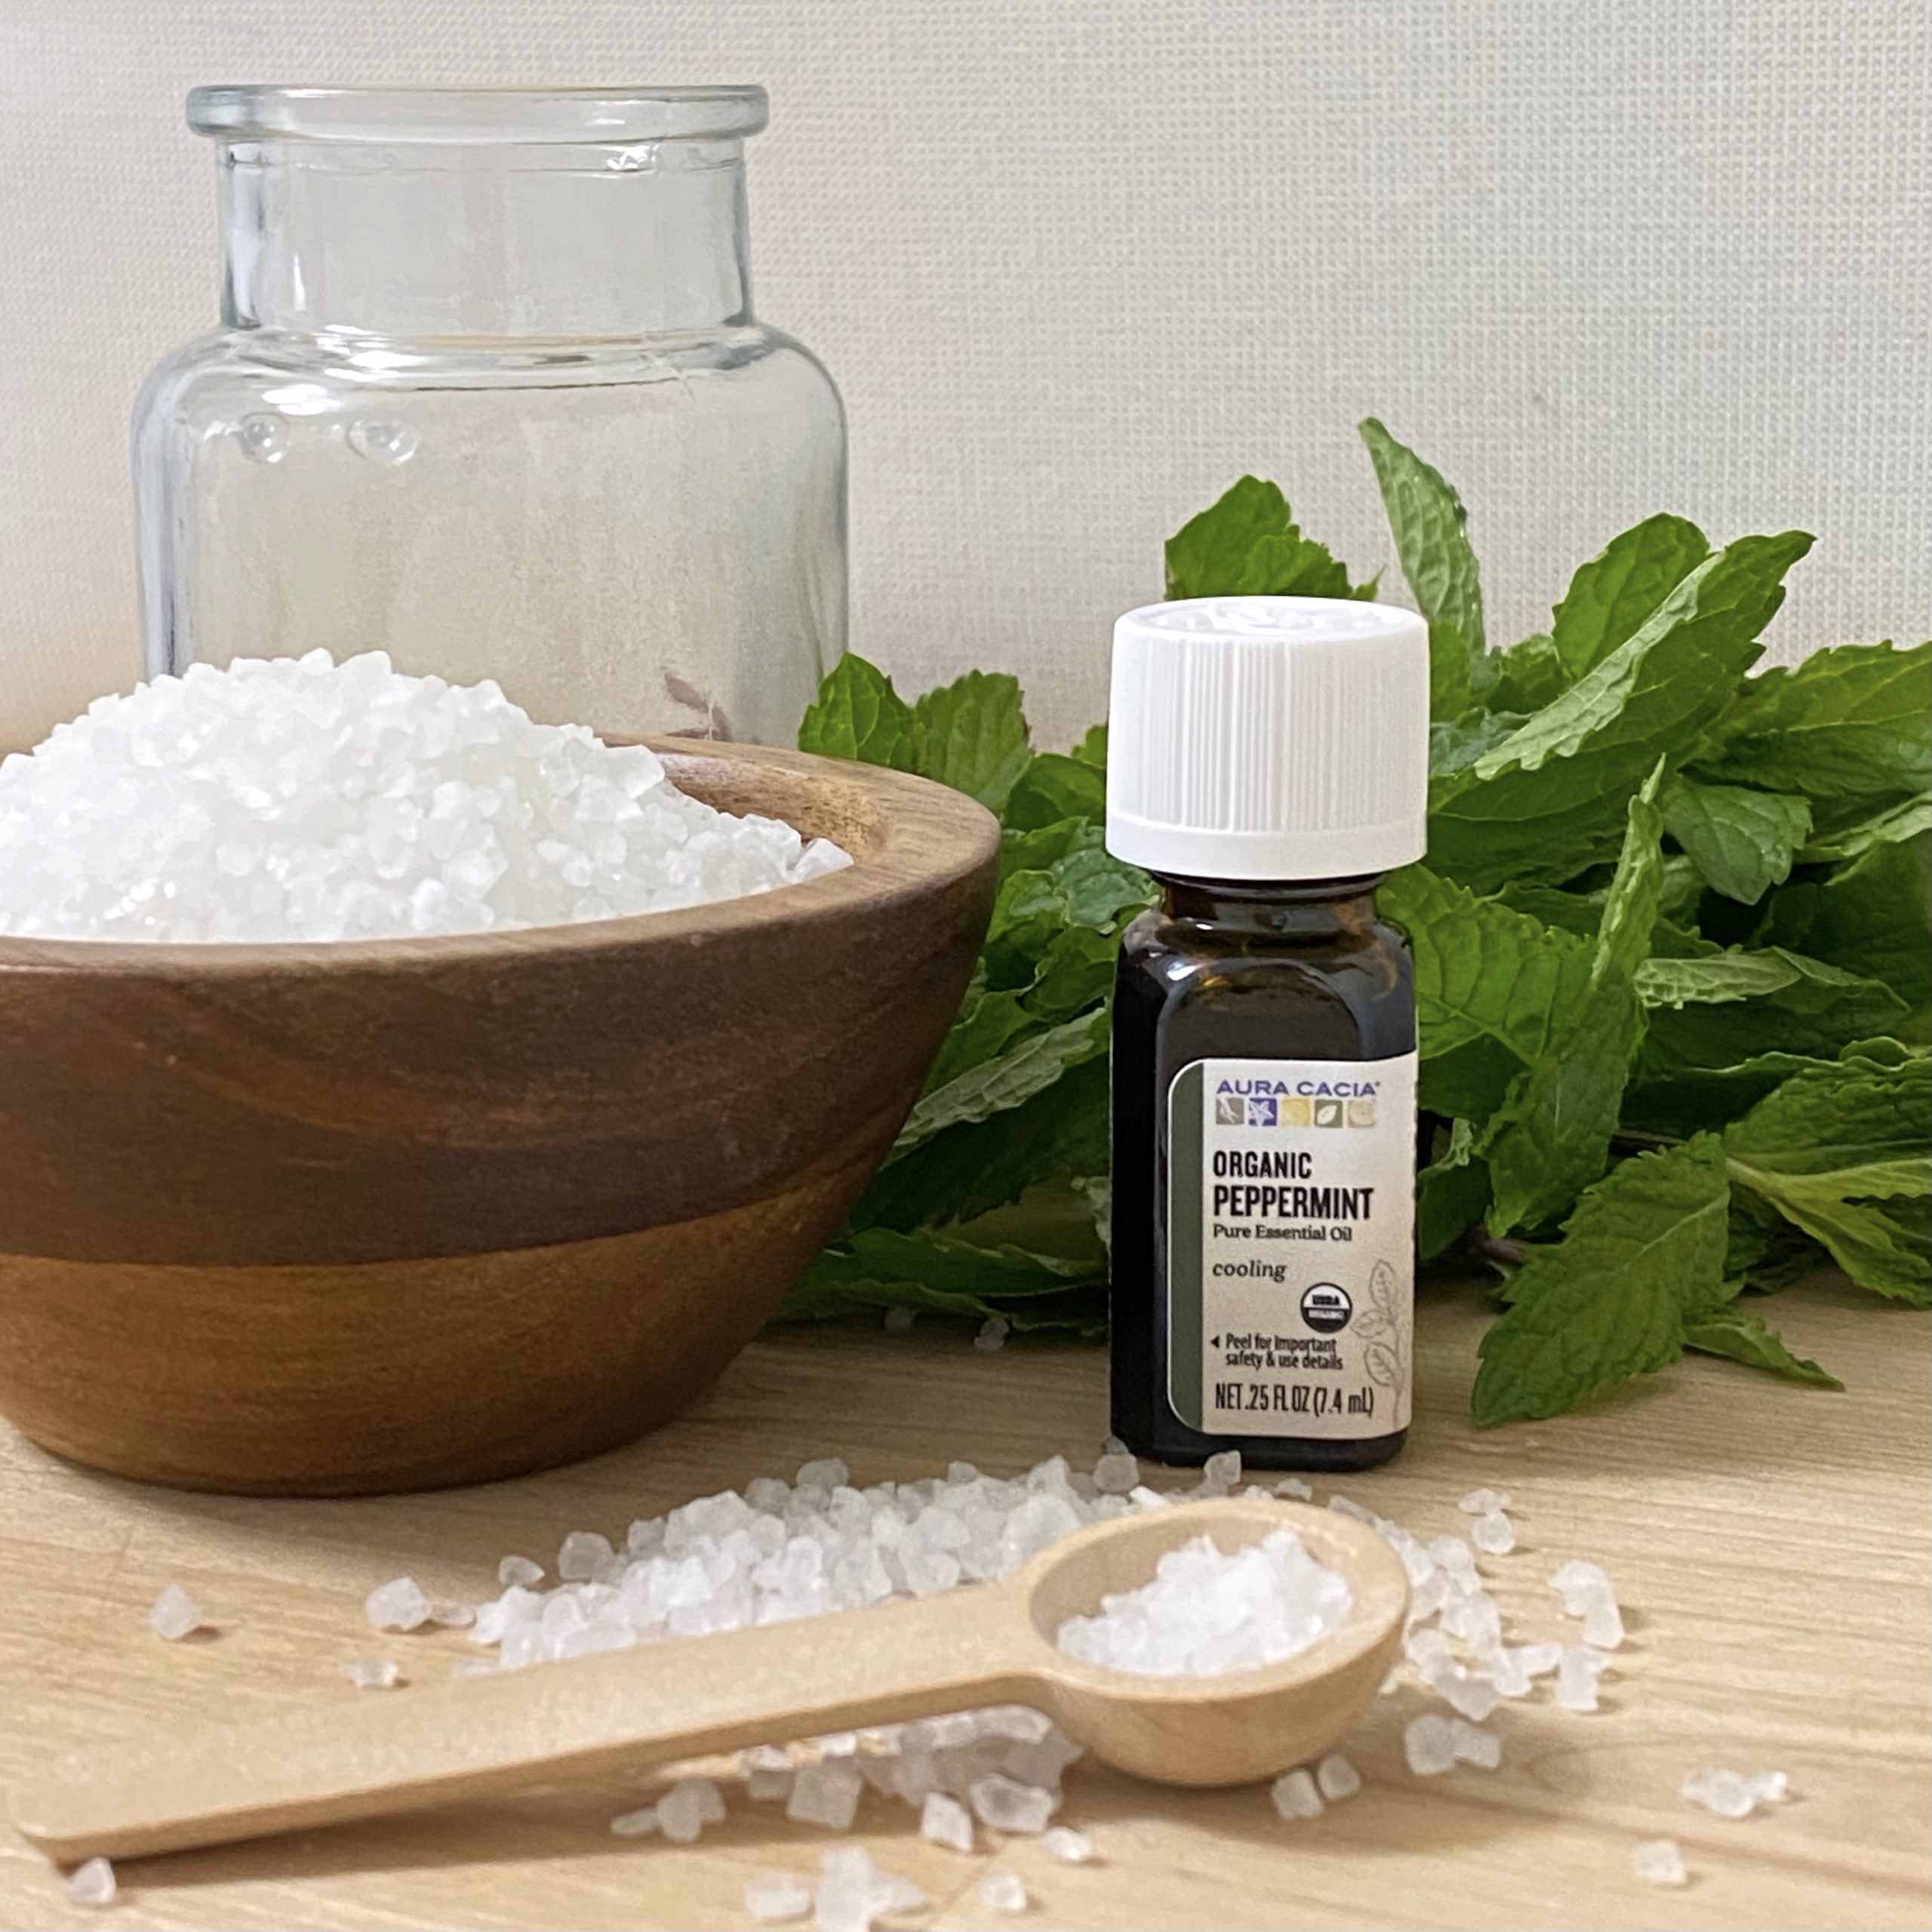 Everything you need to make peppermint bath salts including epsom salt, peppermint essential oil, peppermint, and a jar.